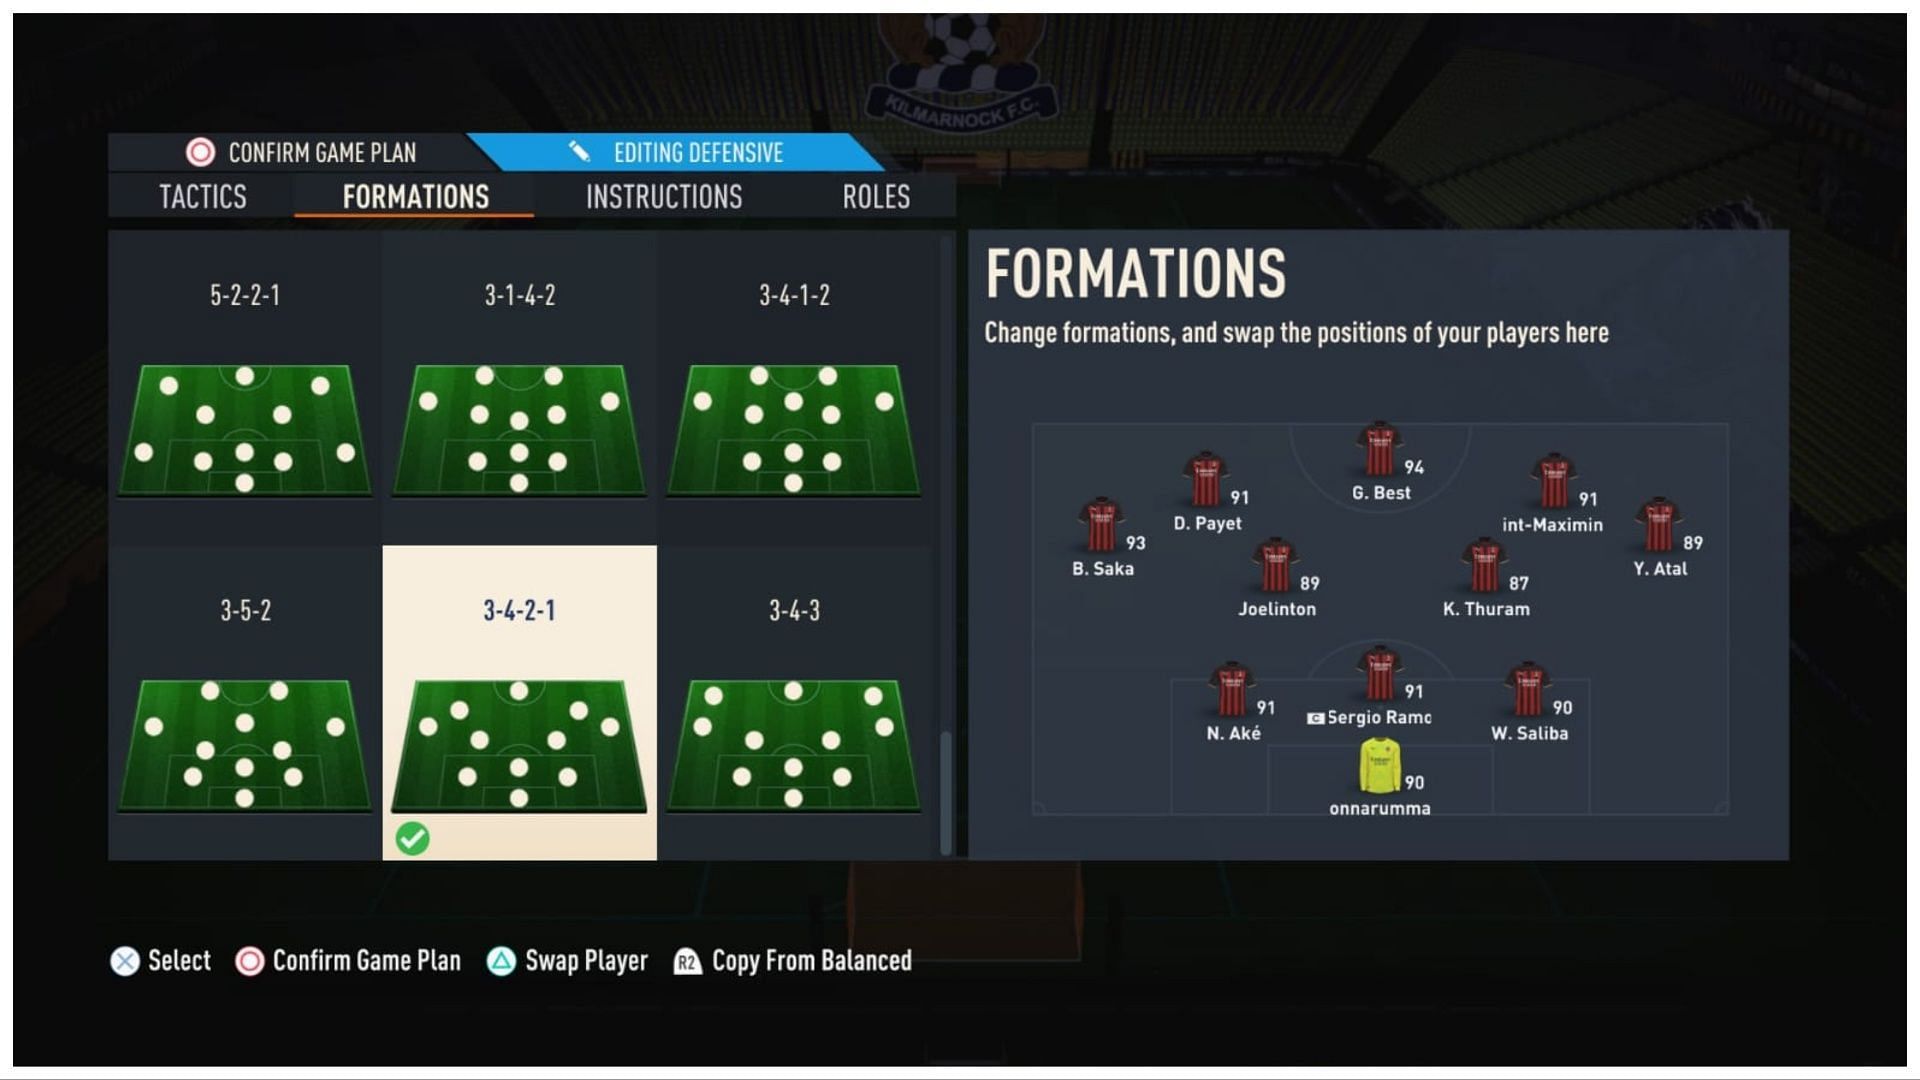 Is 3421 a good formation in FIFA?